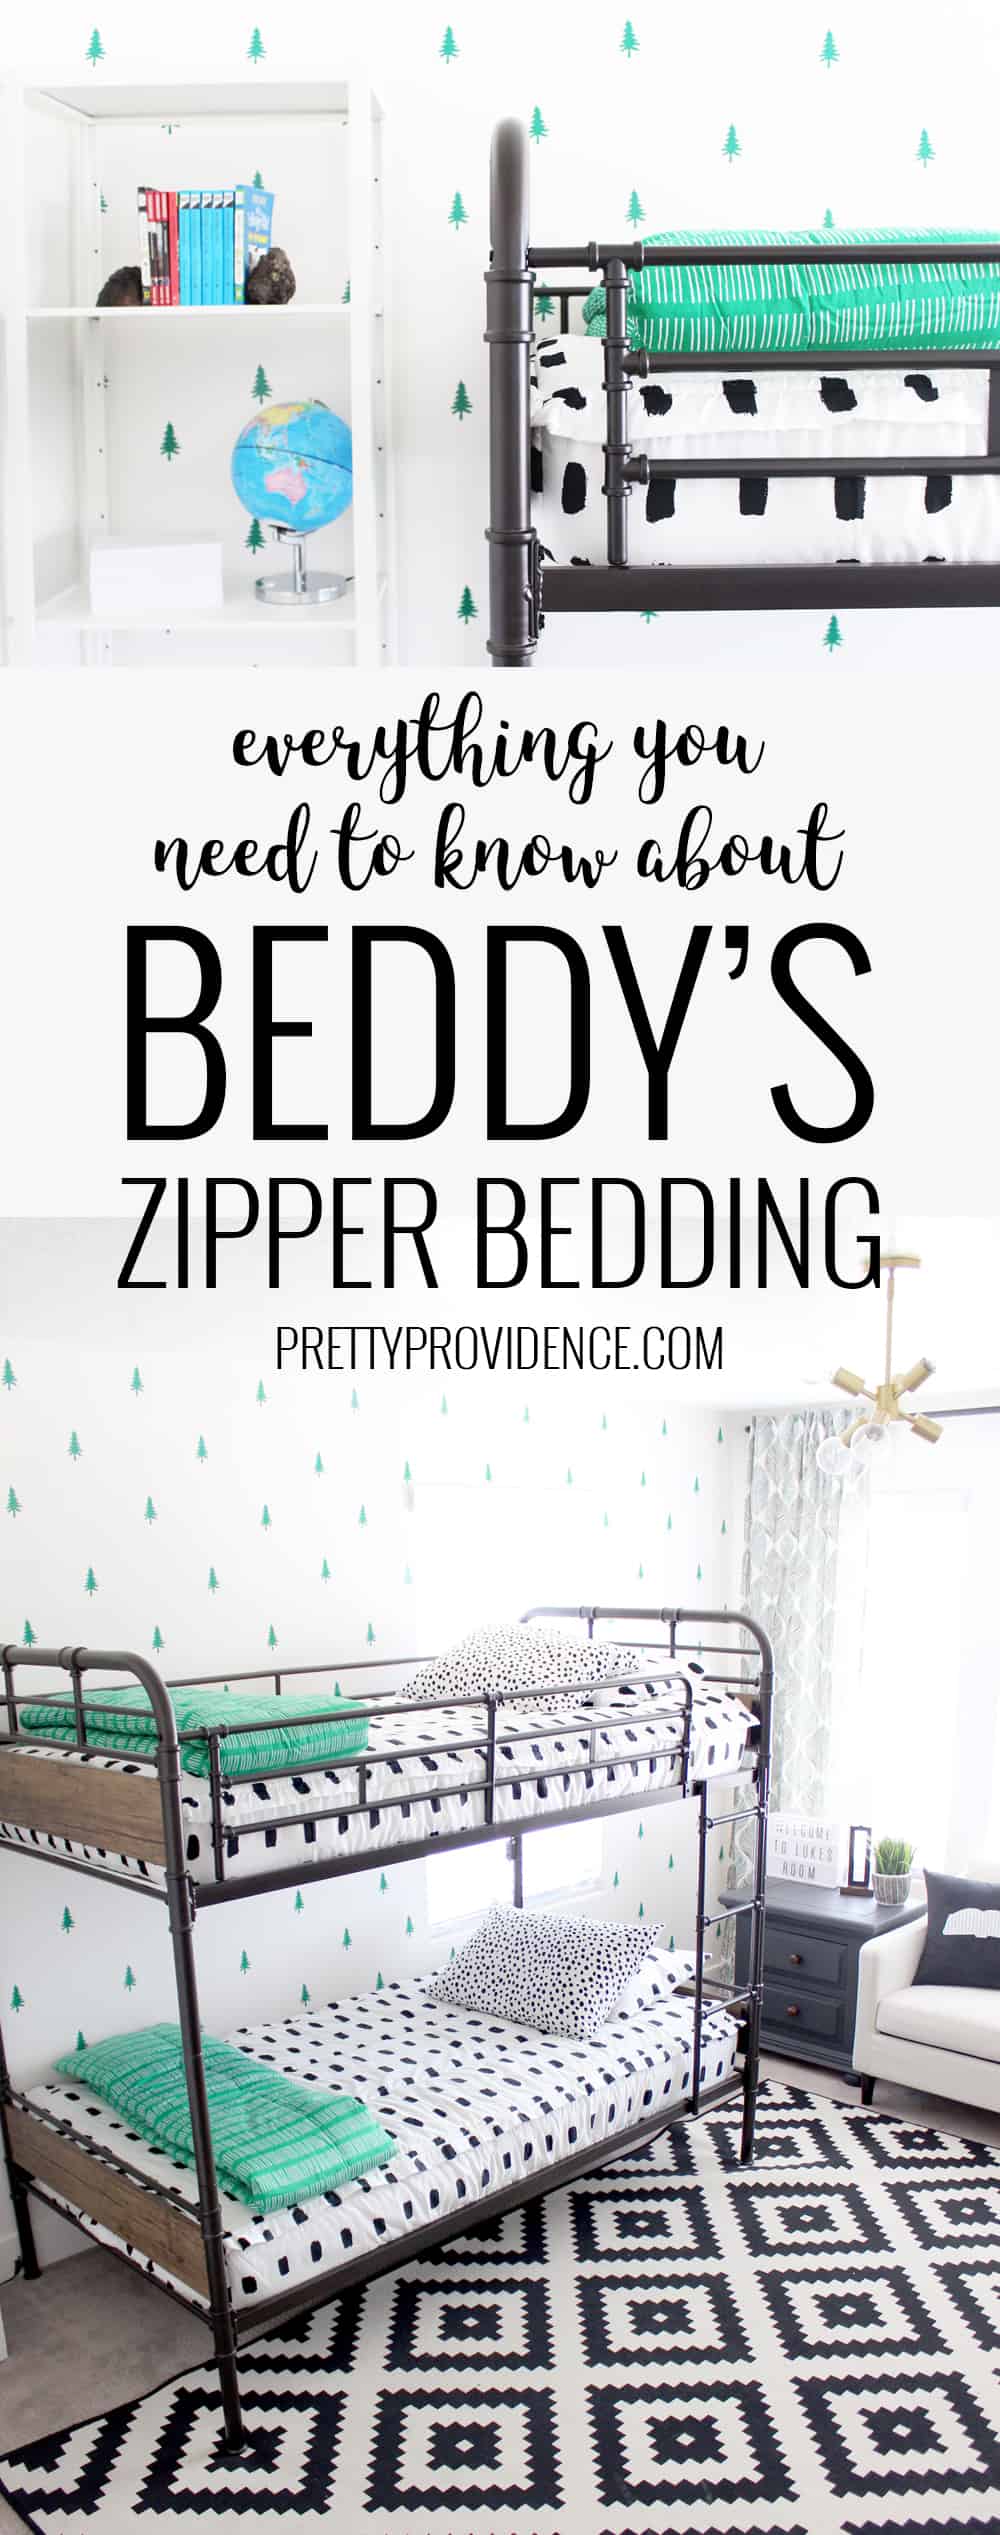 Everything you need to know about Beddy's zipper bedding answered! The perfect bedding for bunk beds, Beddy's bedding has tons of adorable choices!